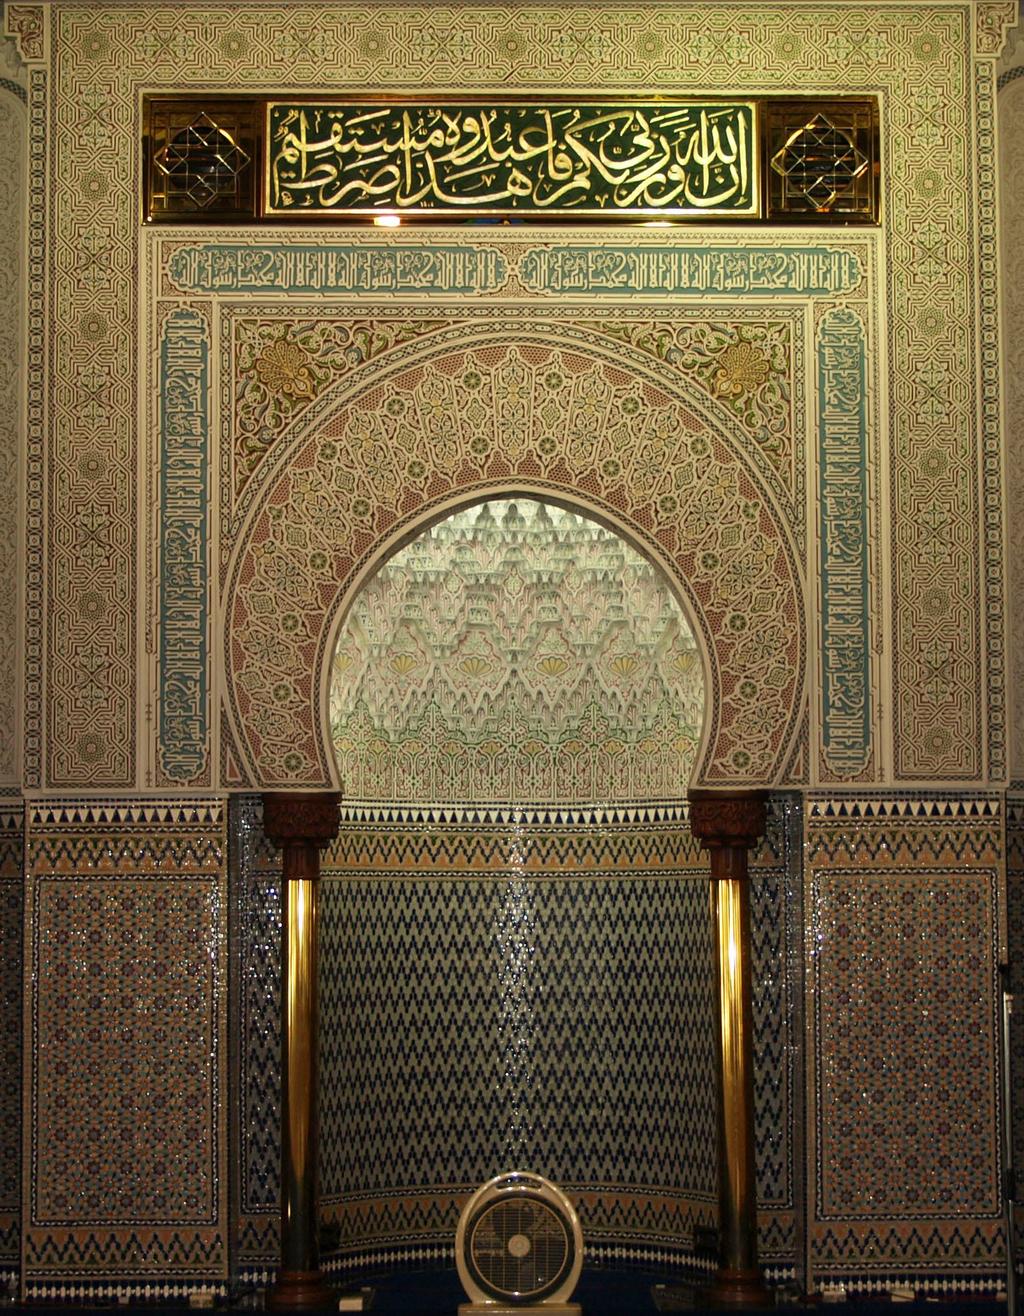 The Mihrab is fully ornamented with stucco and mosaics.